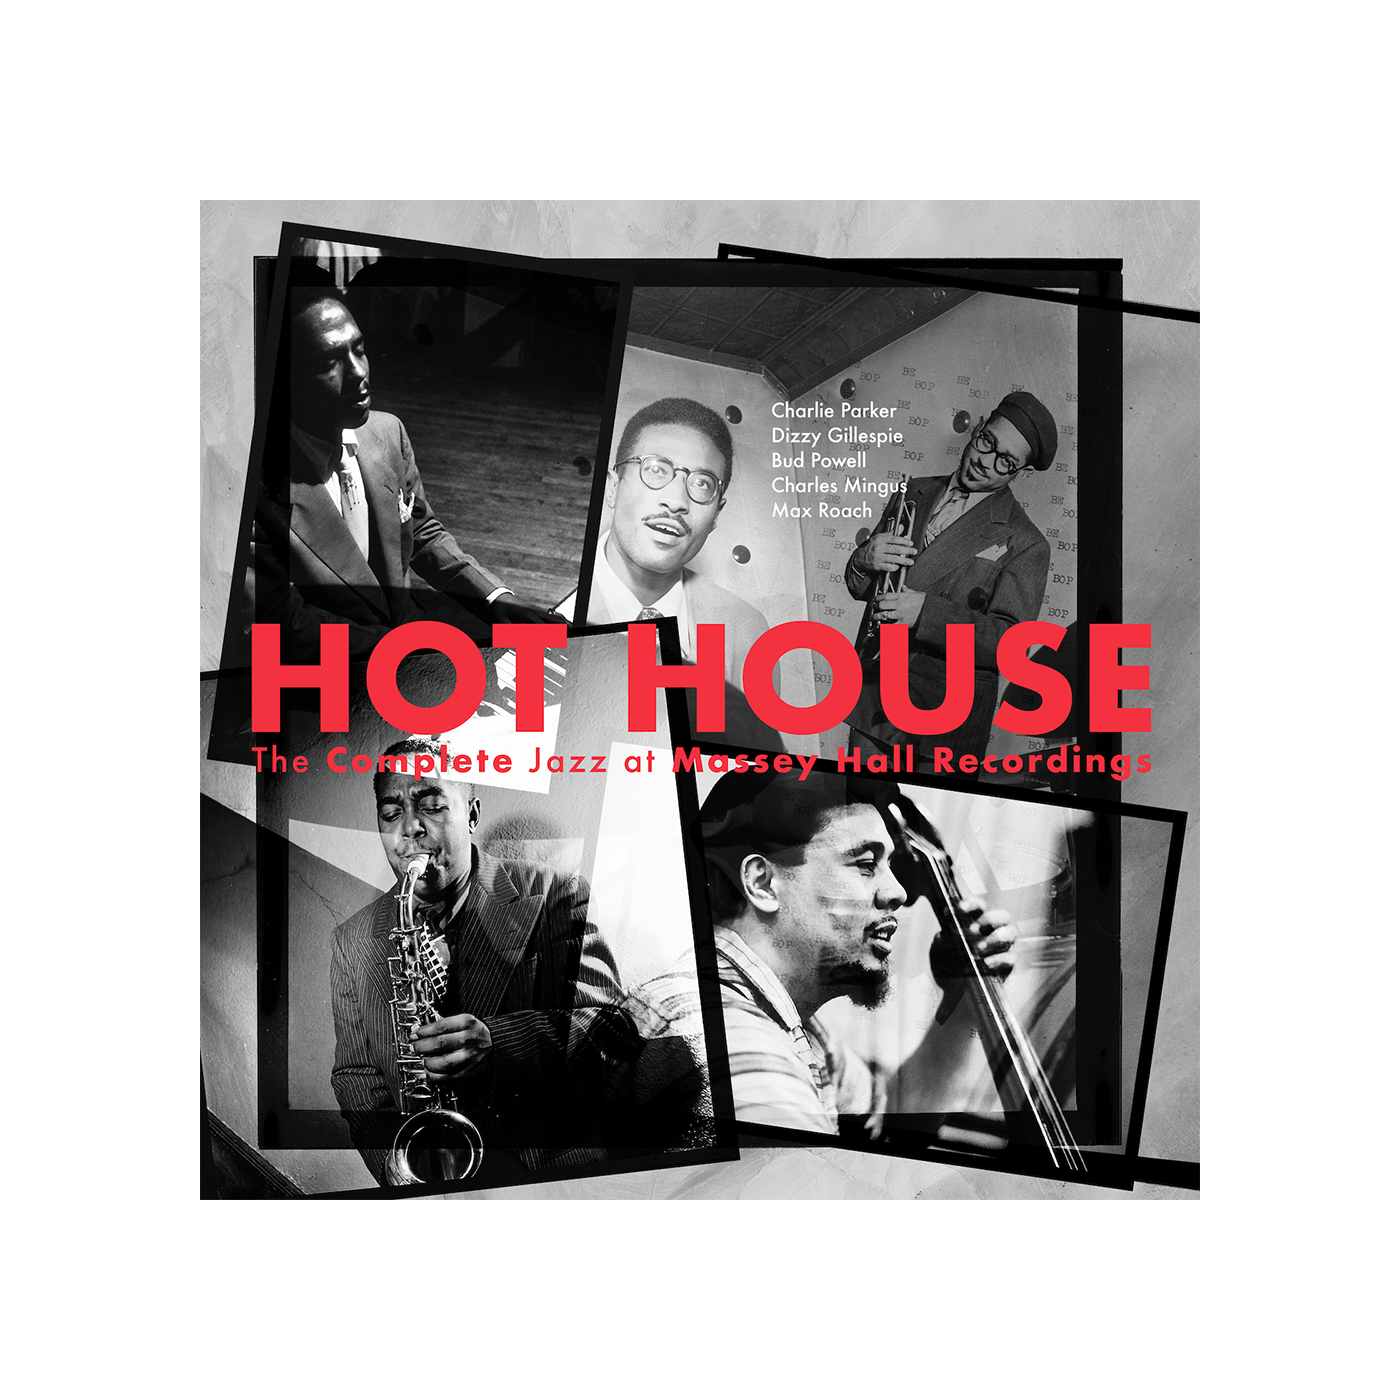 Hot House: The Complete Jazz At Massey Hall Recordings Digital Album